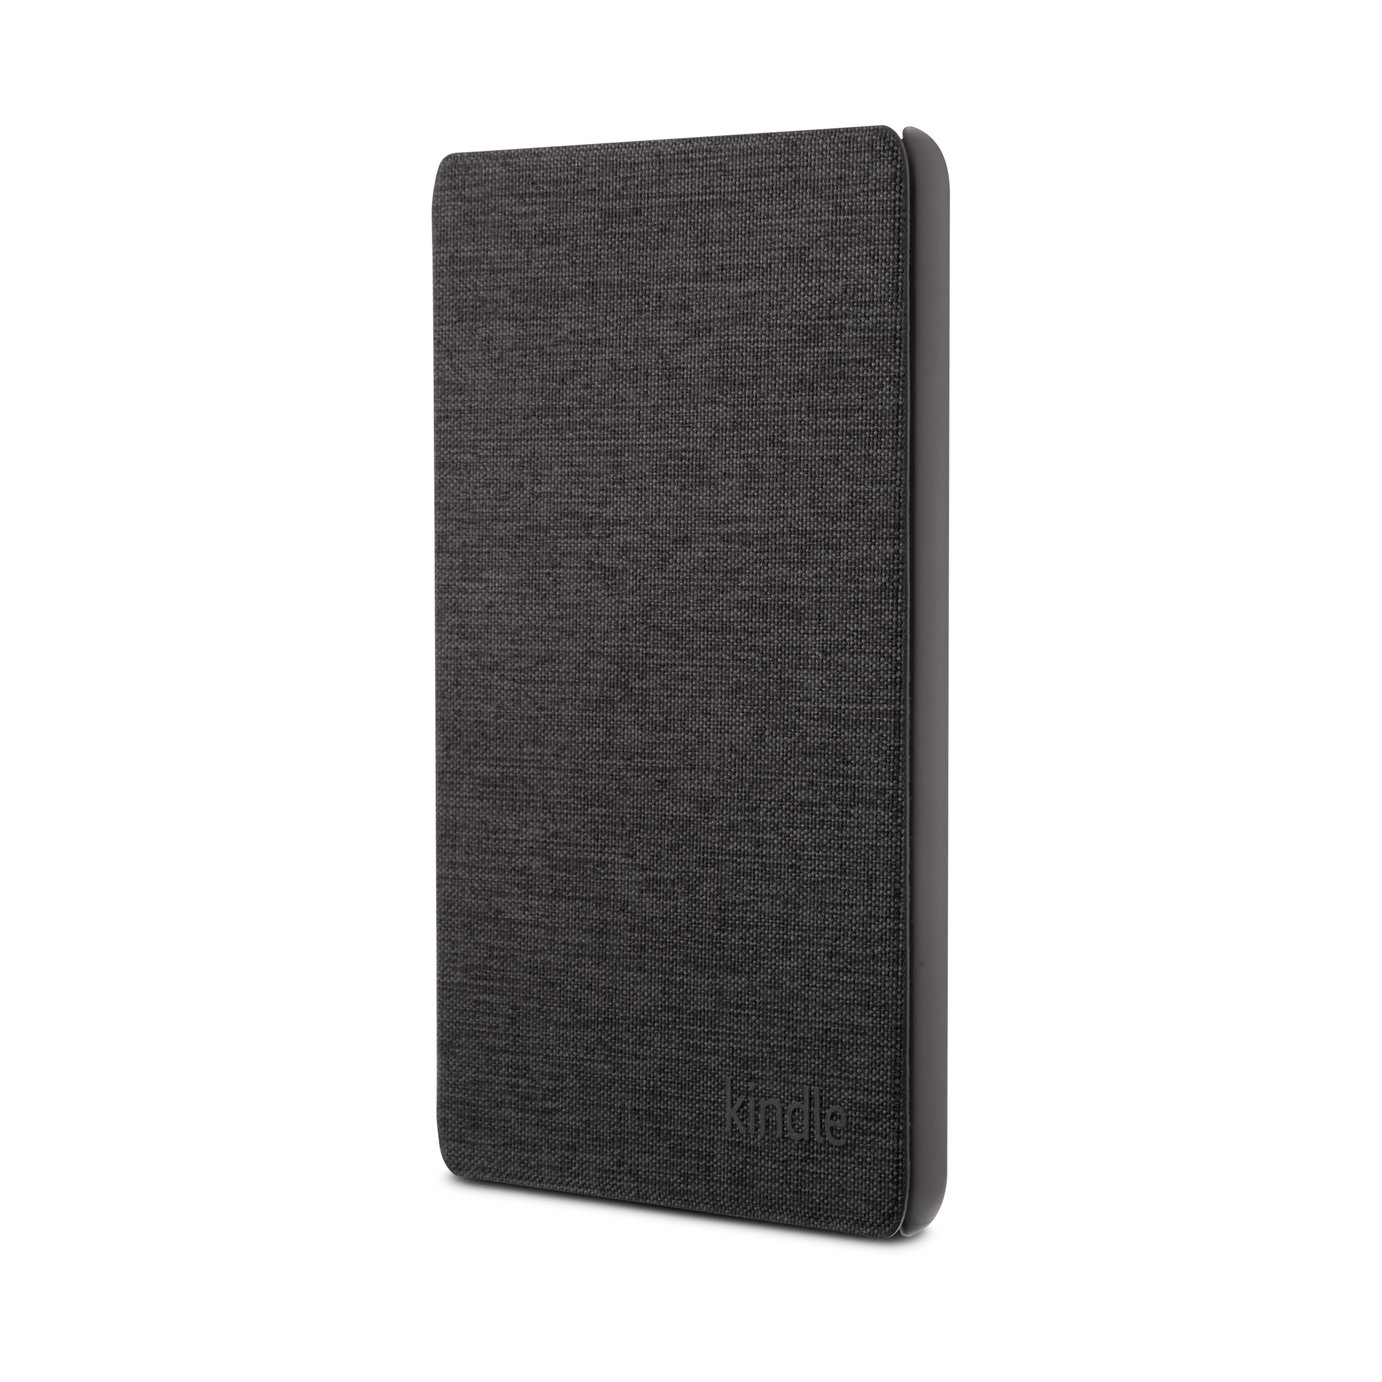 Amazon Kindle Fabric Tablet Cover Review